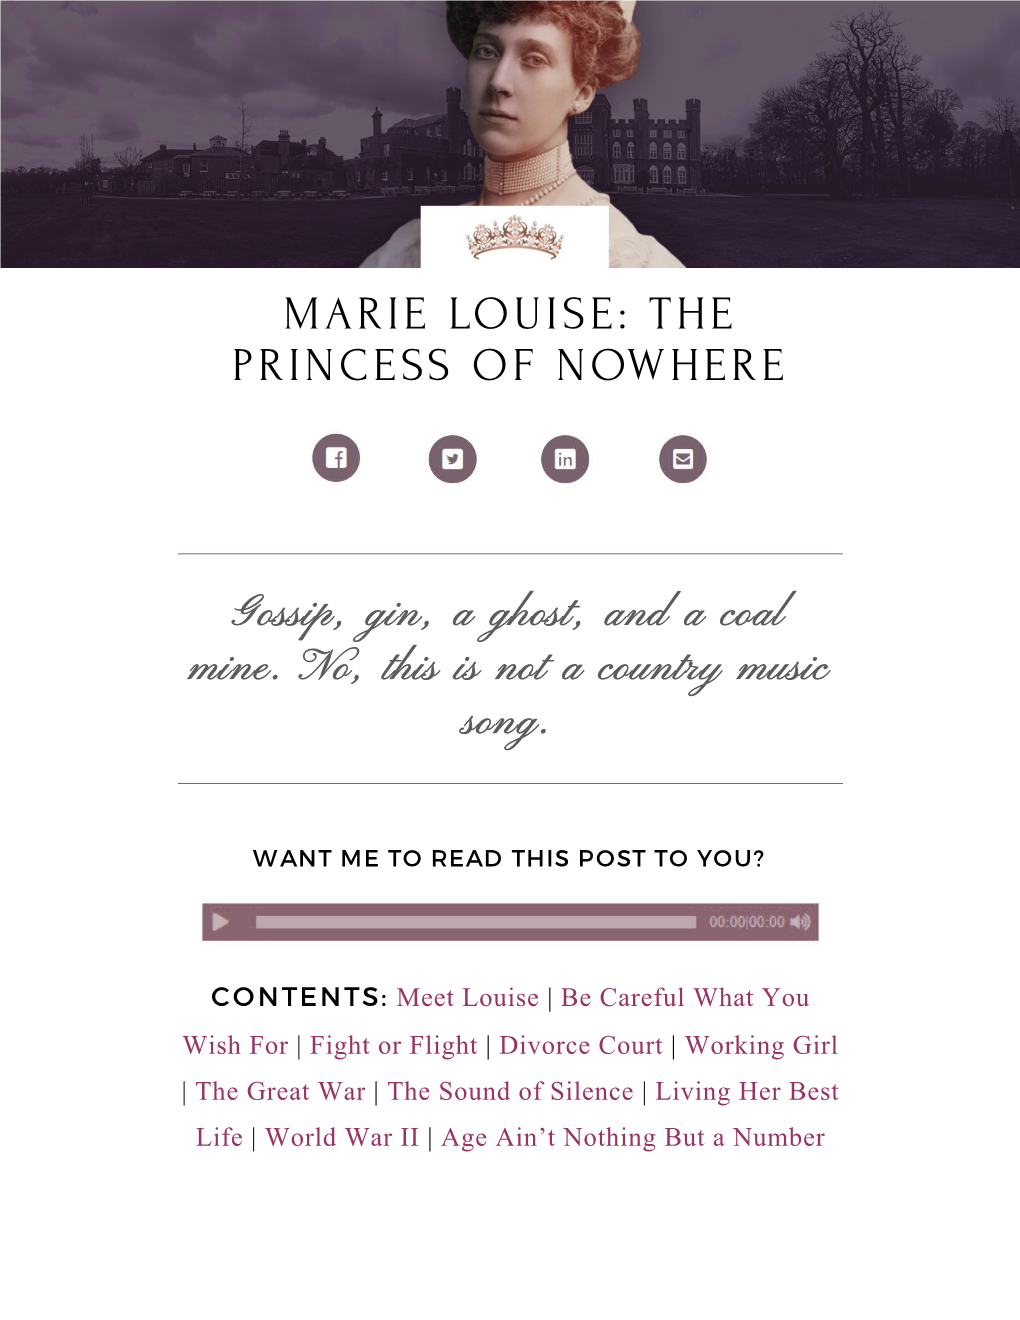 Marie Louise: the Princess of Nowhere